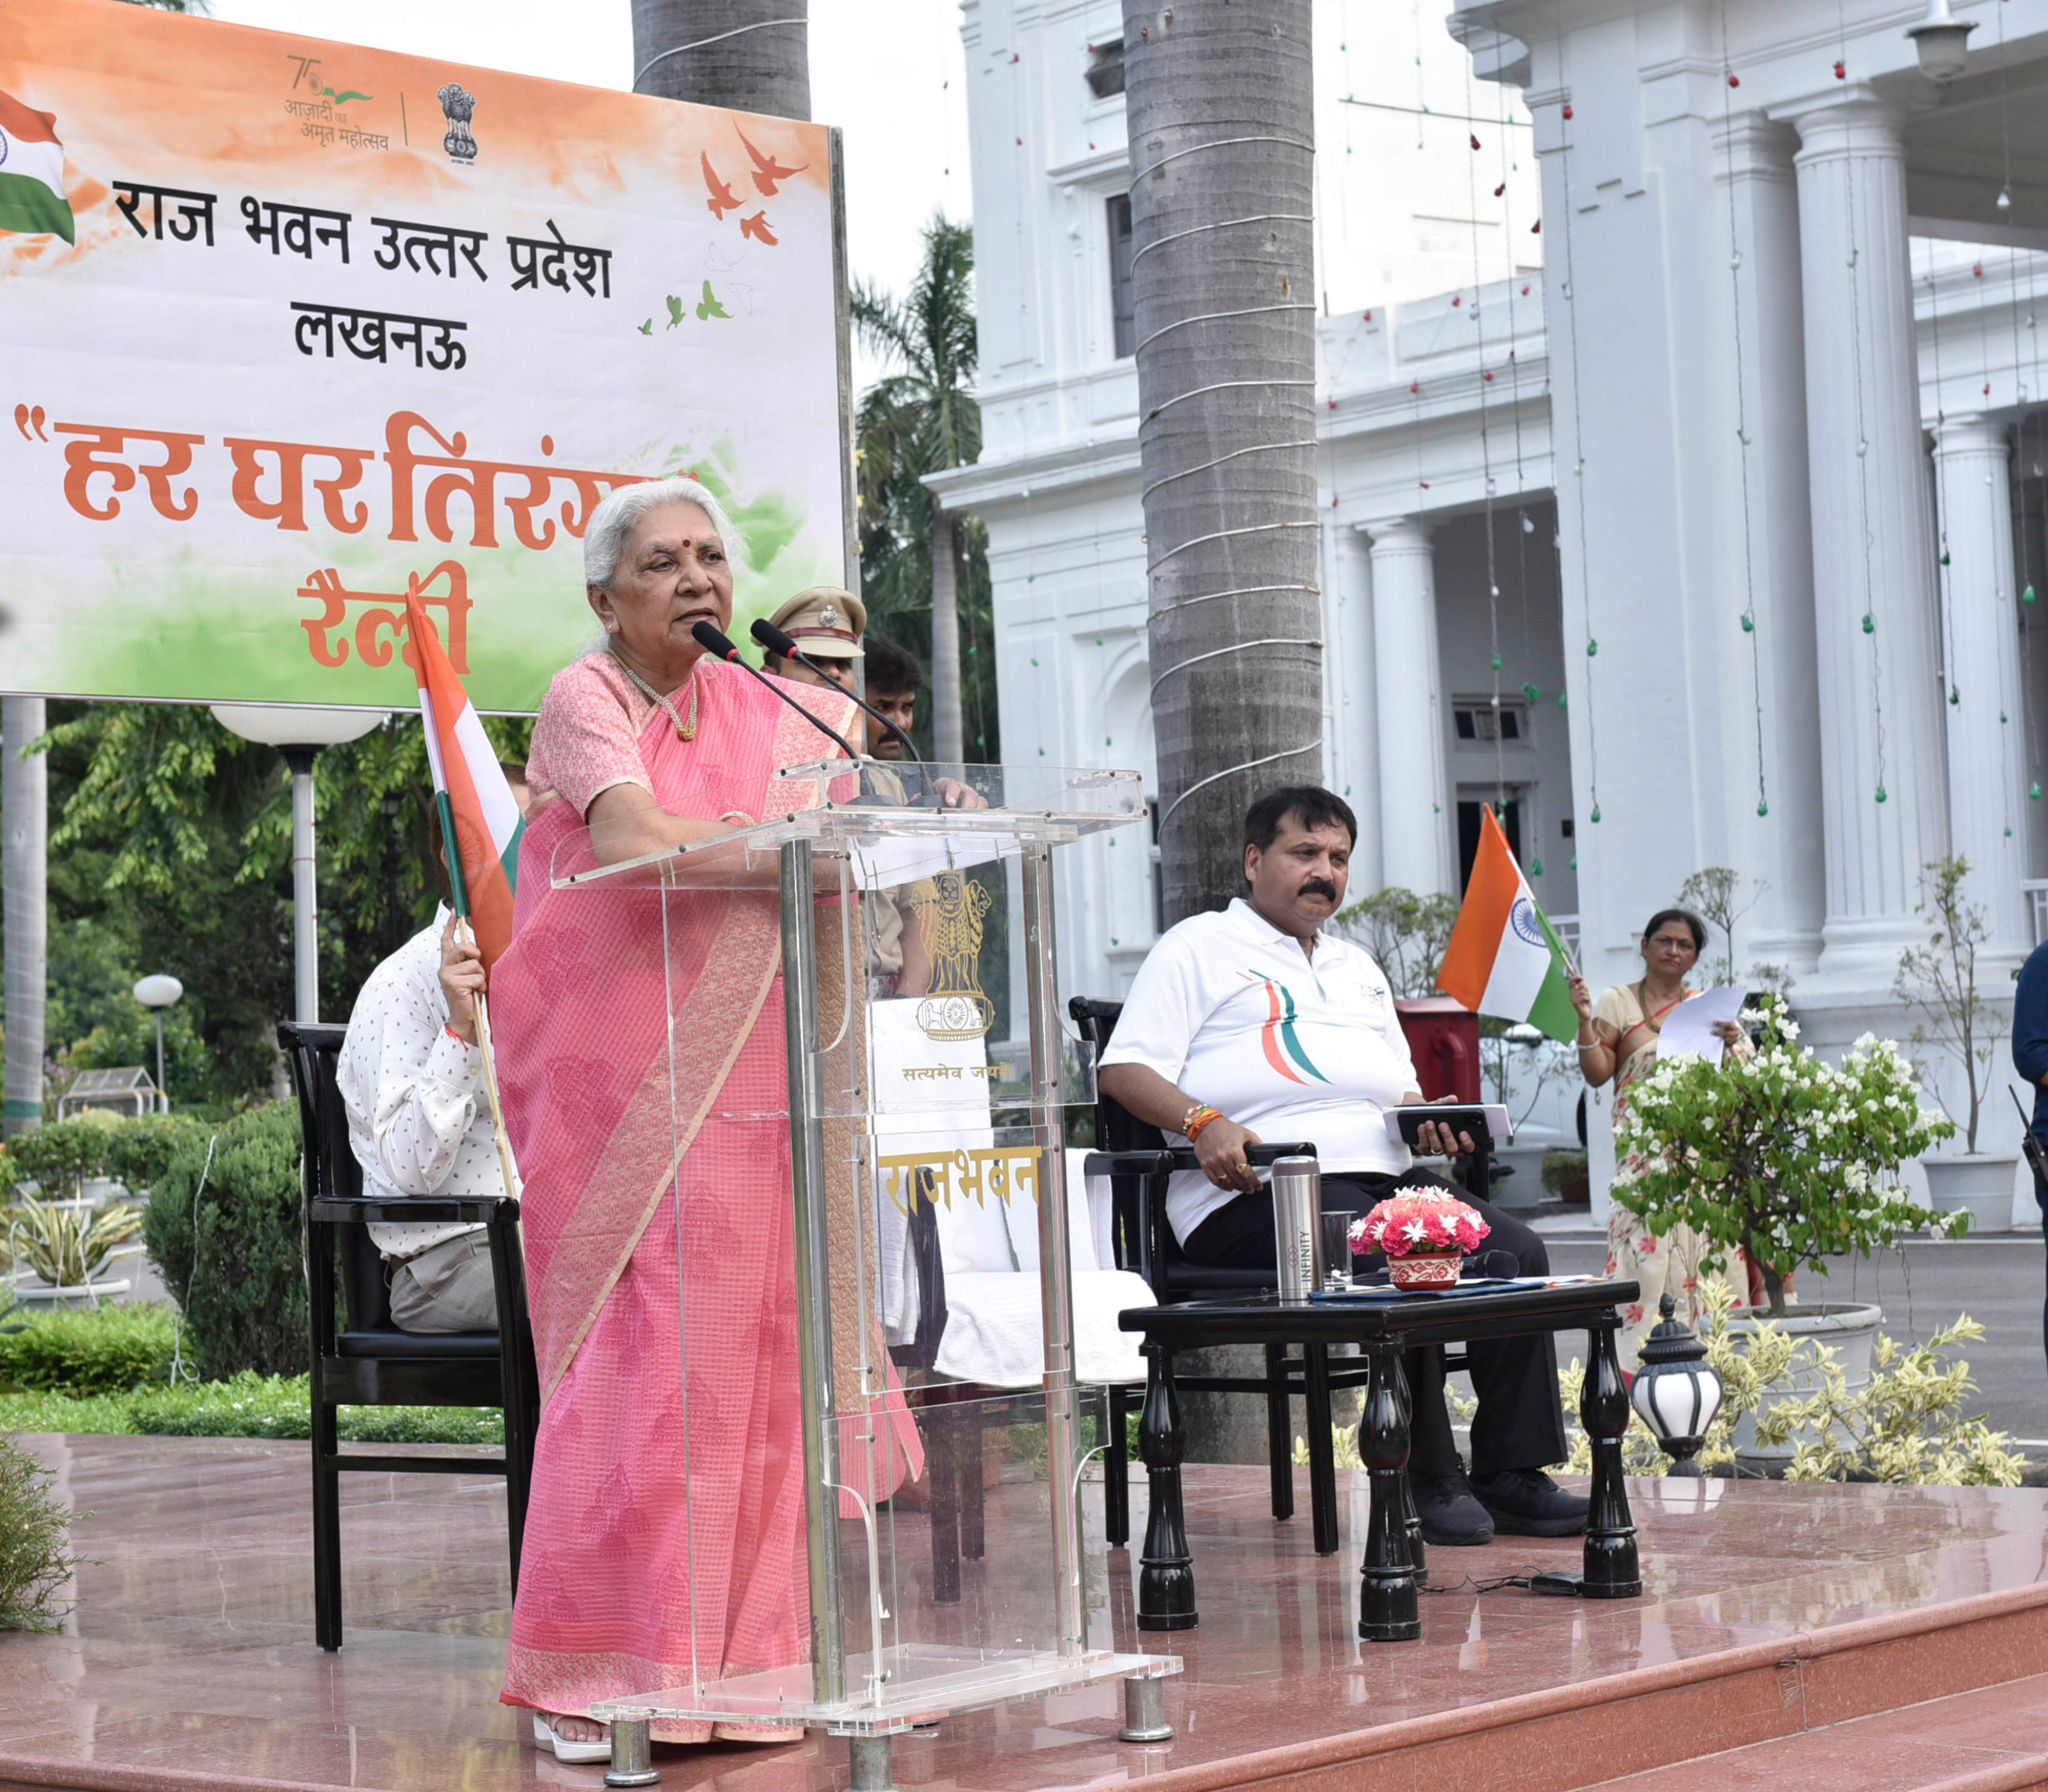 Governor flags off the tricolor rally from the Raj Bhavan